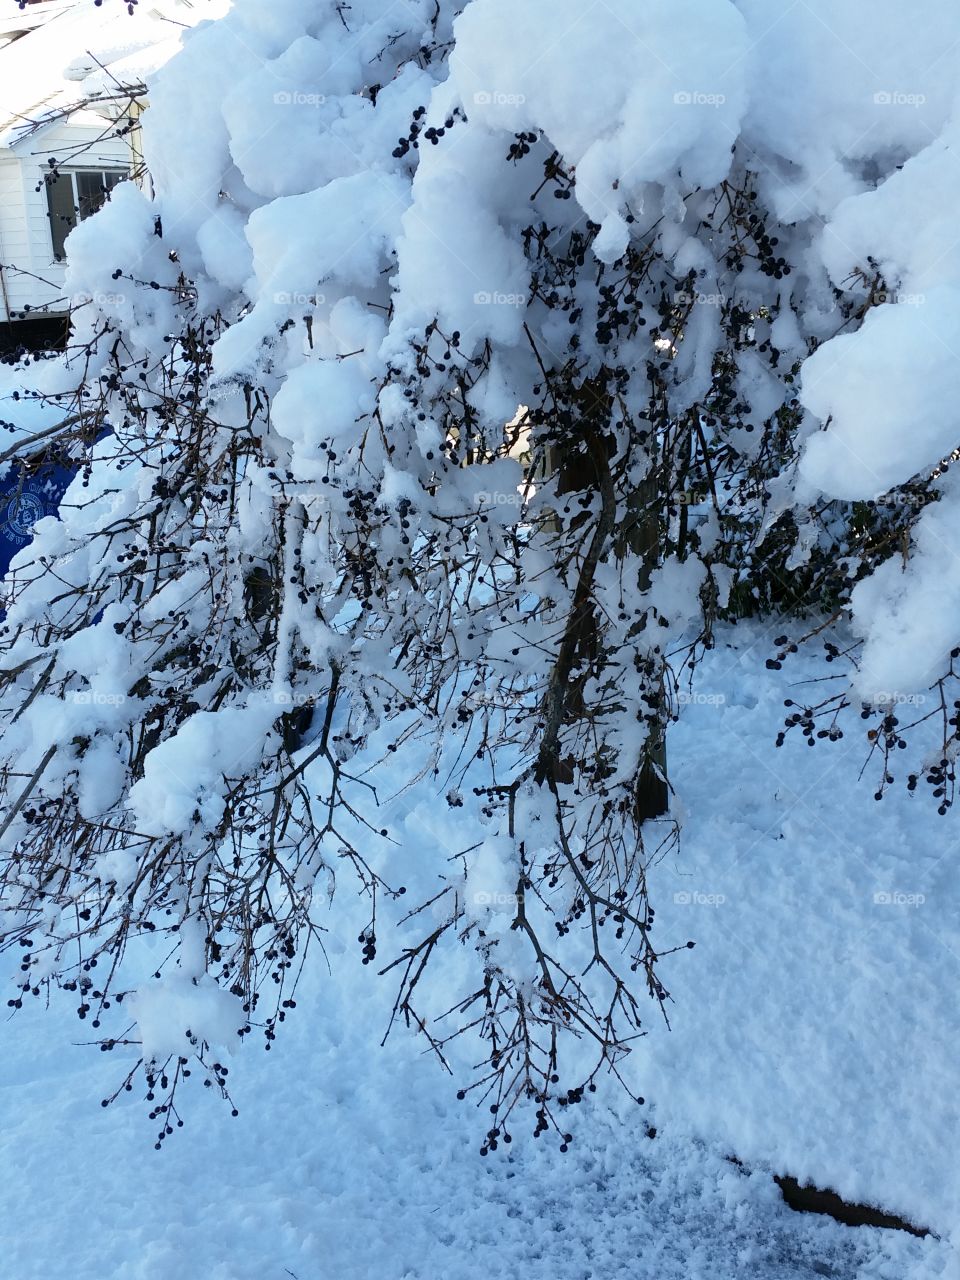 Snow on tree branches after a blizzard